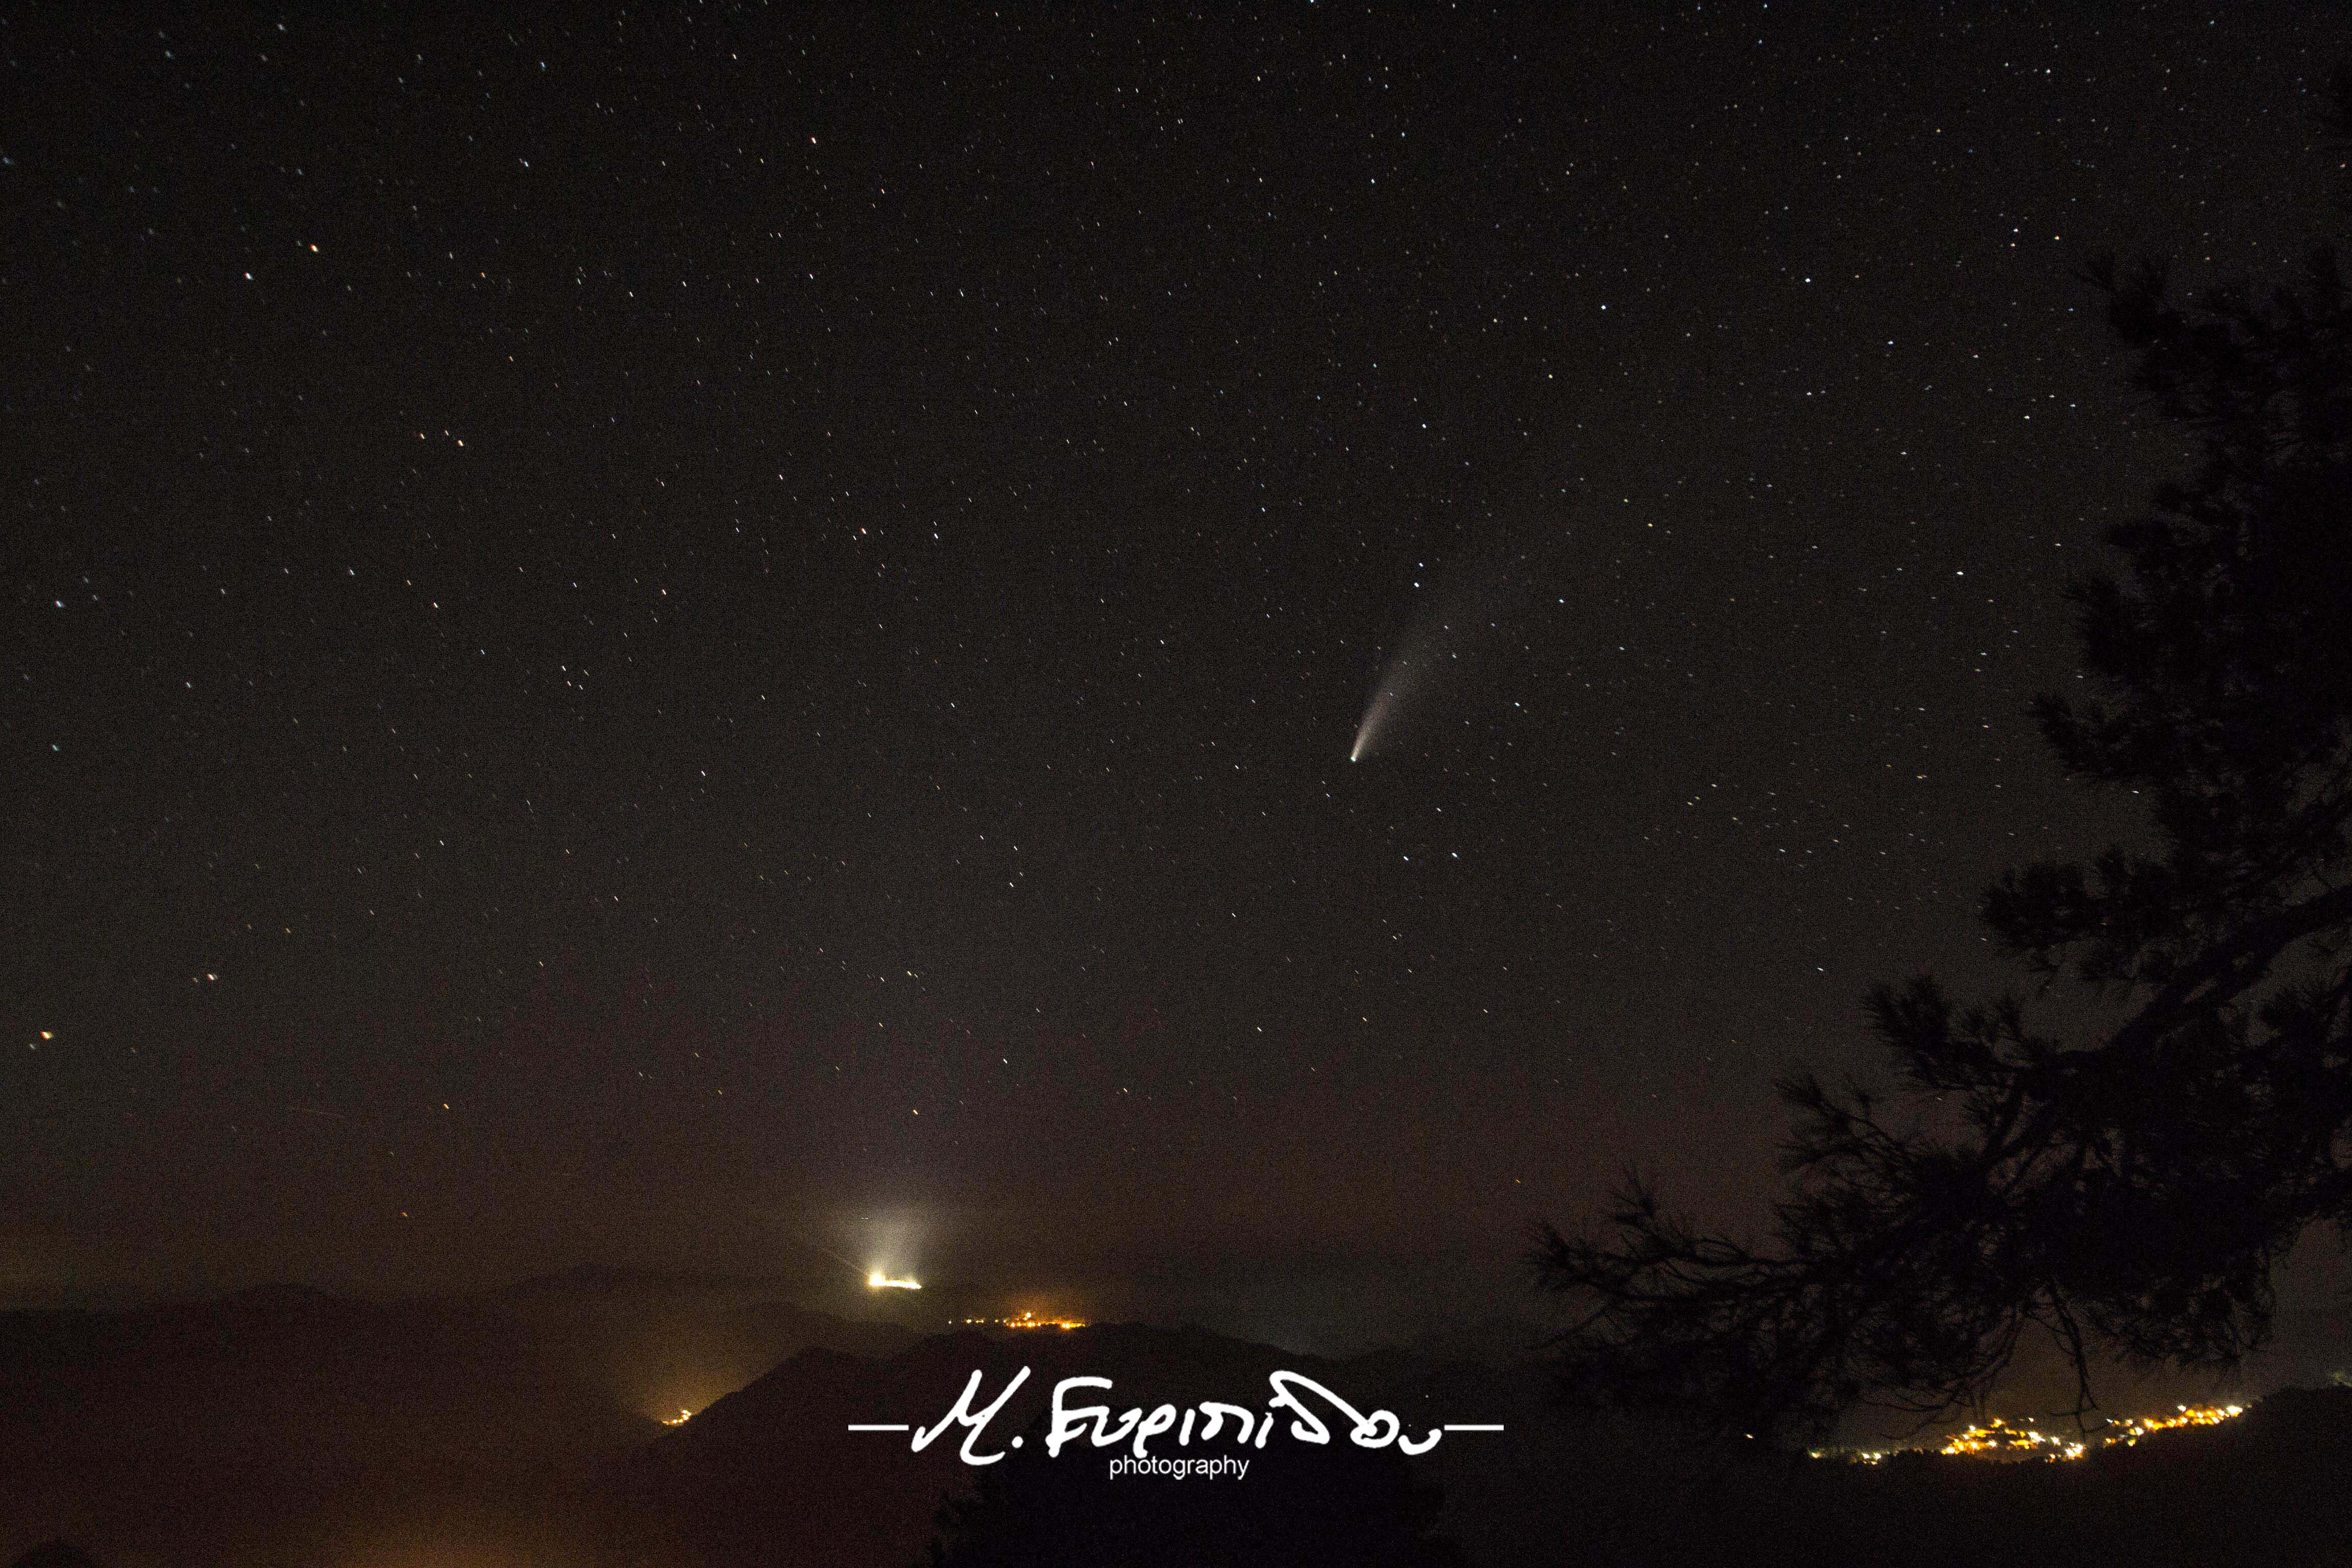 19-7-2020 neowise comet over cyprus